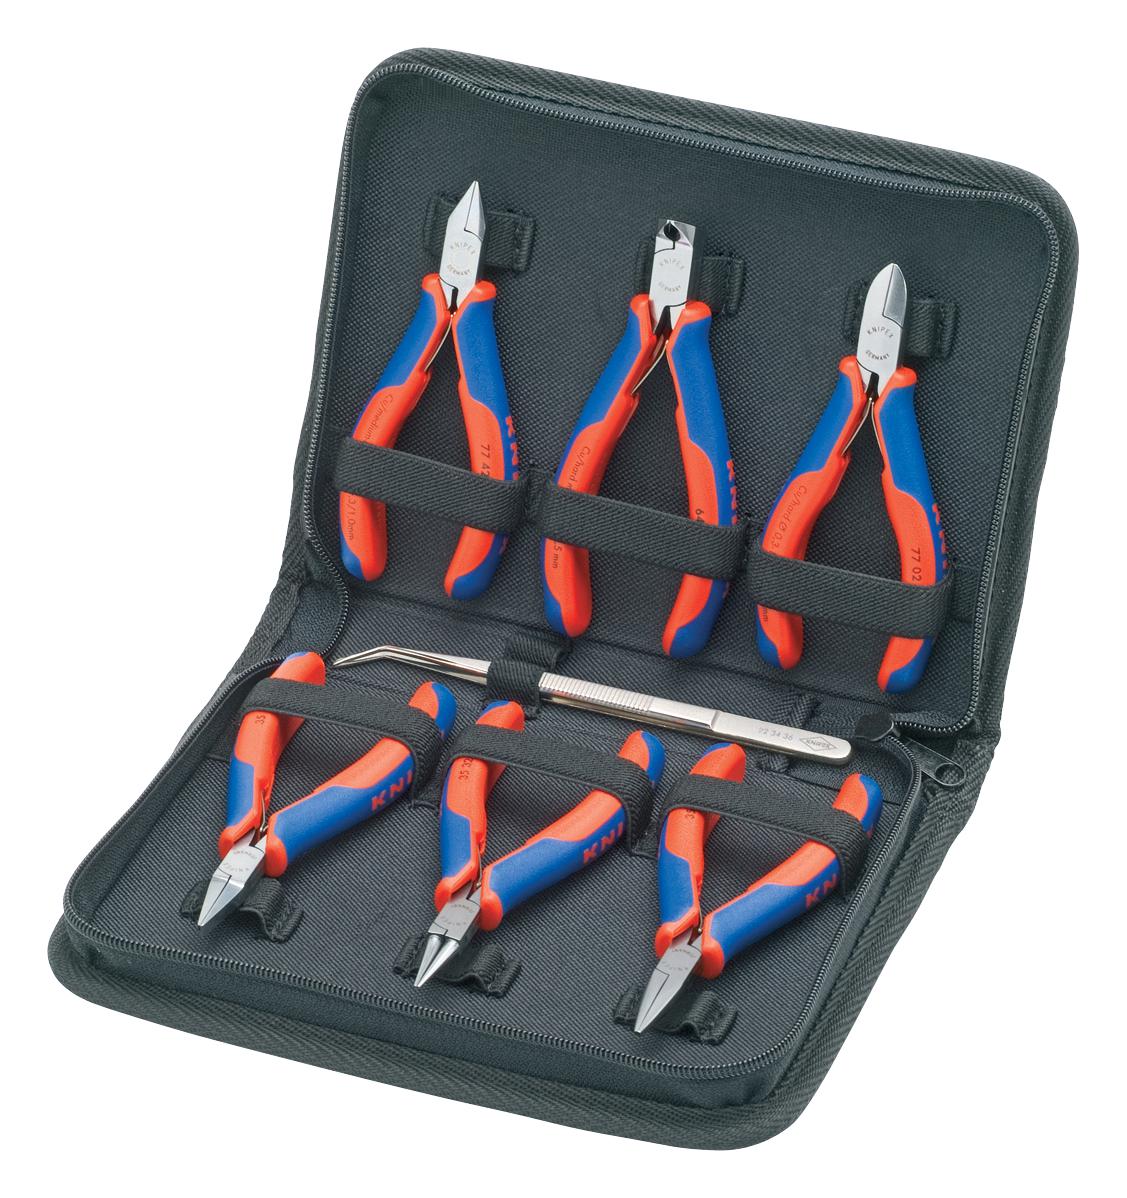 00 20 16 TOOL KIT, PLIER/CUTTER, 7PC KNIPEX